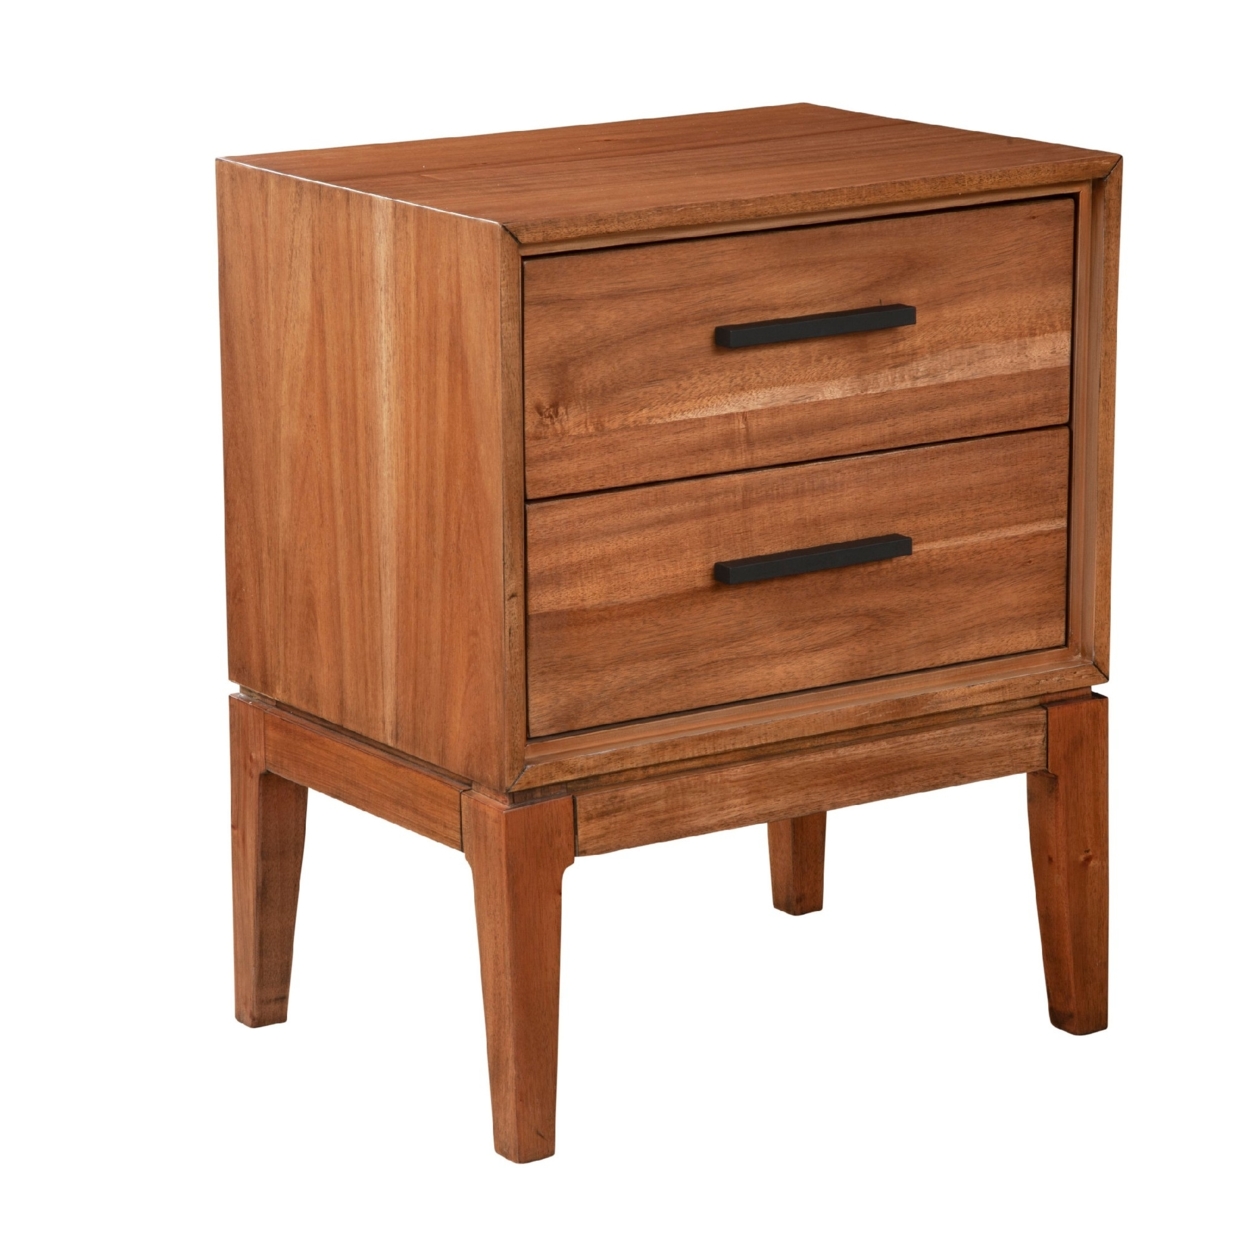 Nightstand With 2 Drawers And Wooden Frame, Brown- Saltoro Sherpi